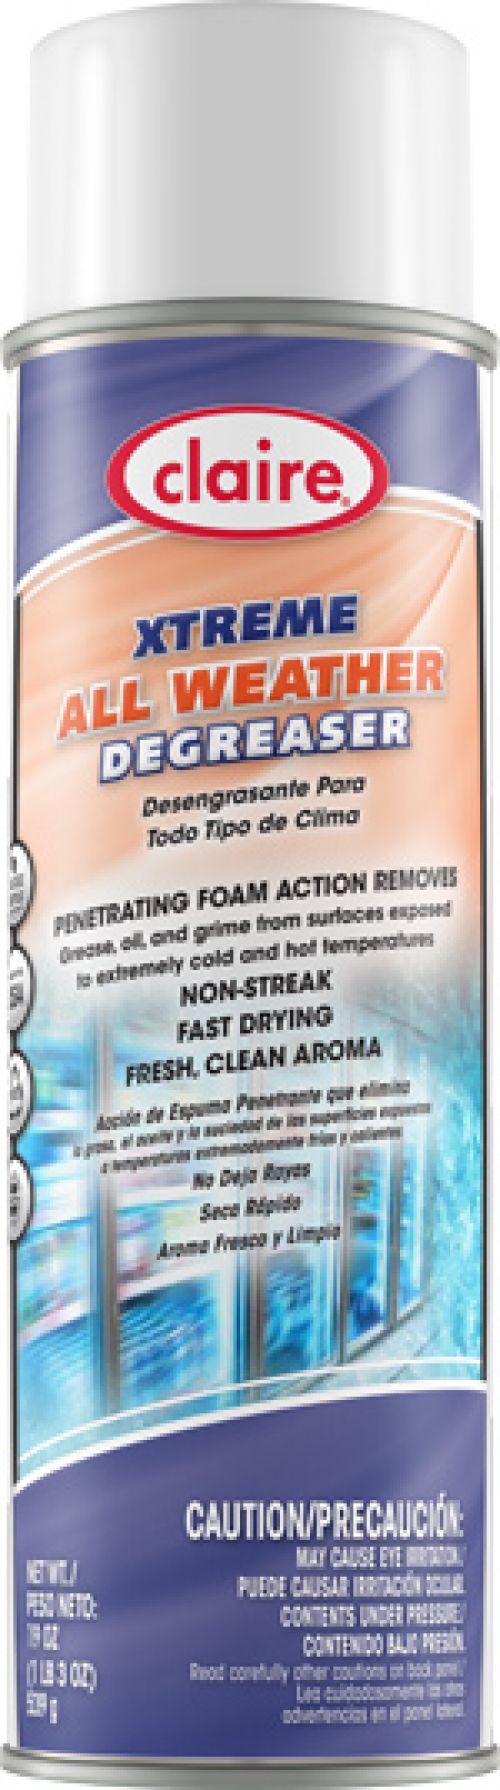 EXTREME All Weather Degreaser